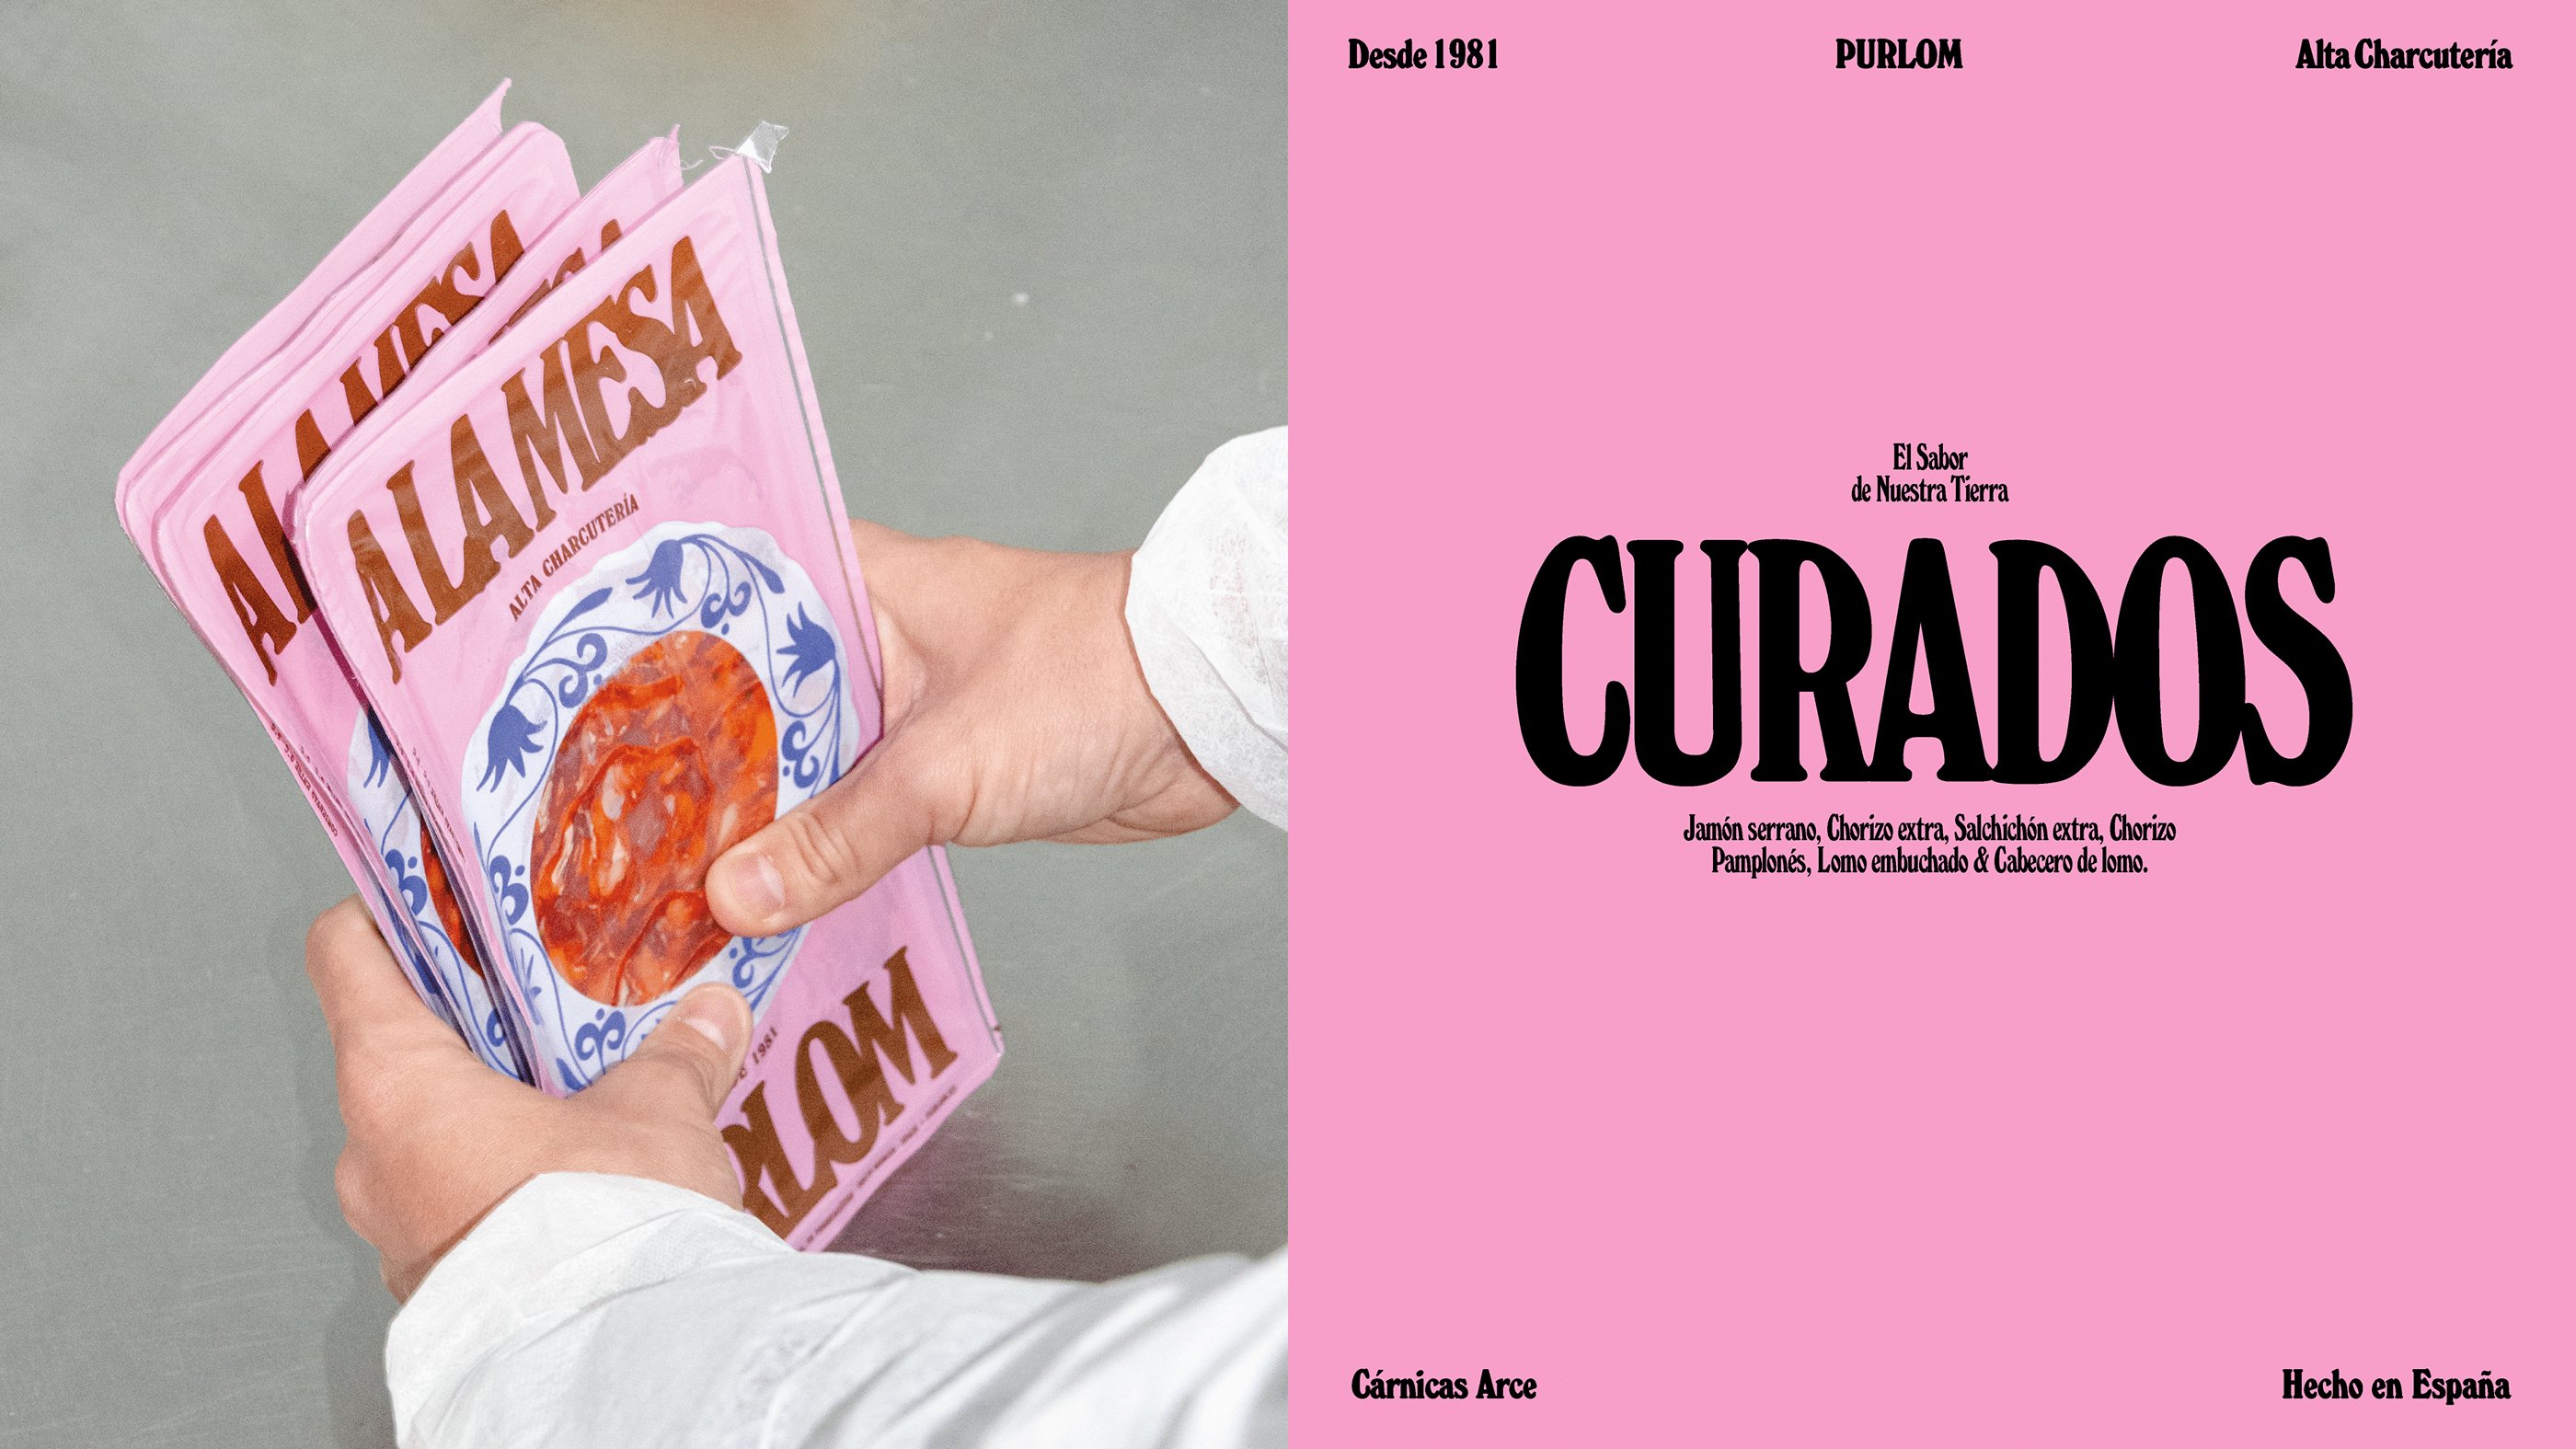 ew brand identity design, art direction, packaging and website for PURLOM’s ’A La Mesa’ cured meat brand created by Spain's Onmi Design